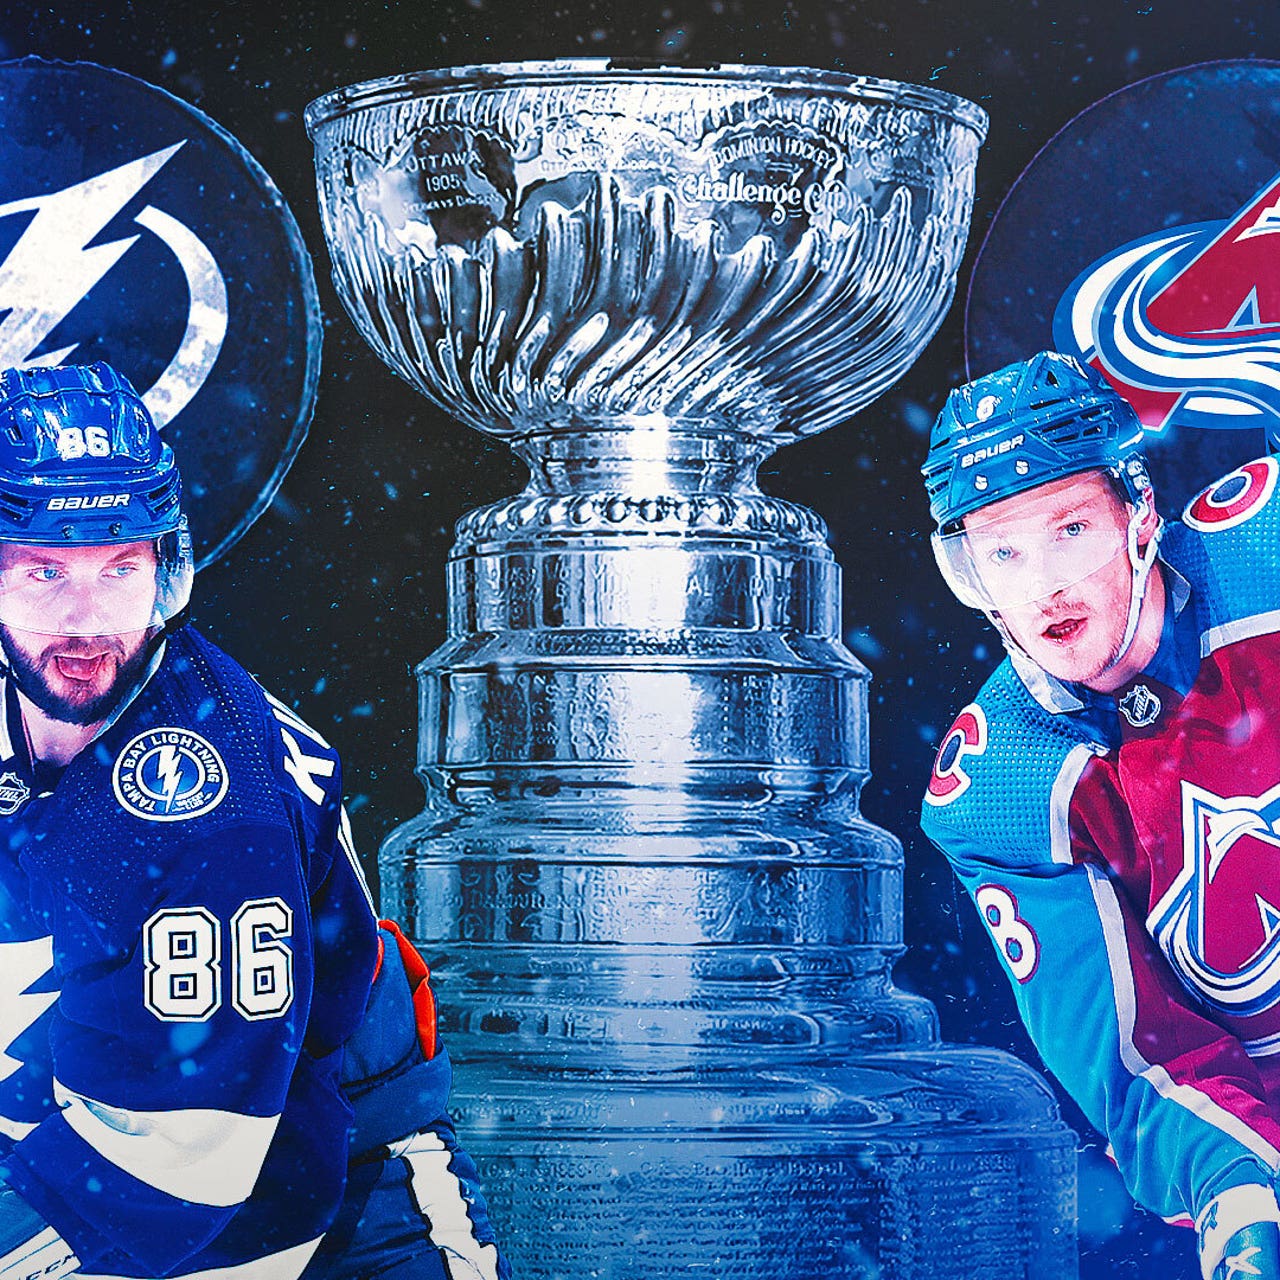 Stanley Cup champions  List, Results, Teams, Finals, & Facts